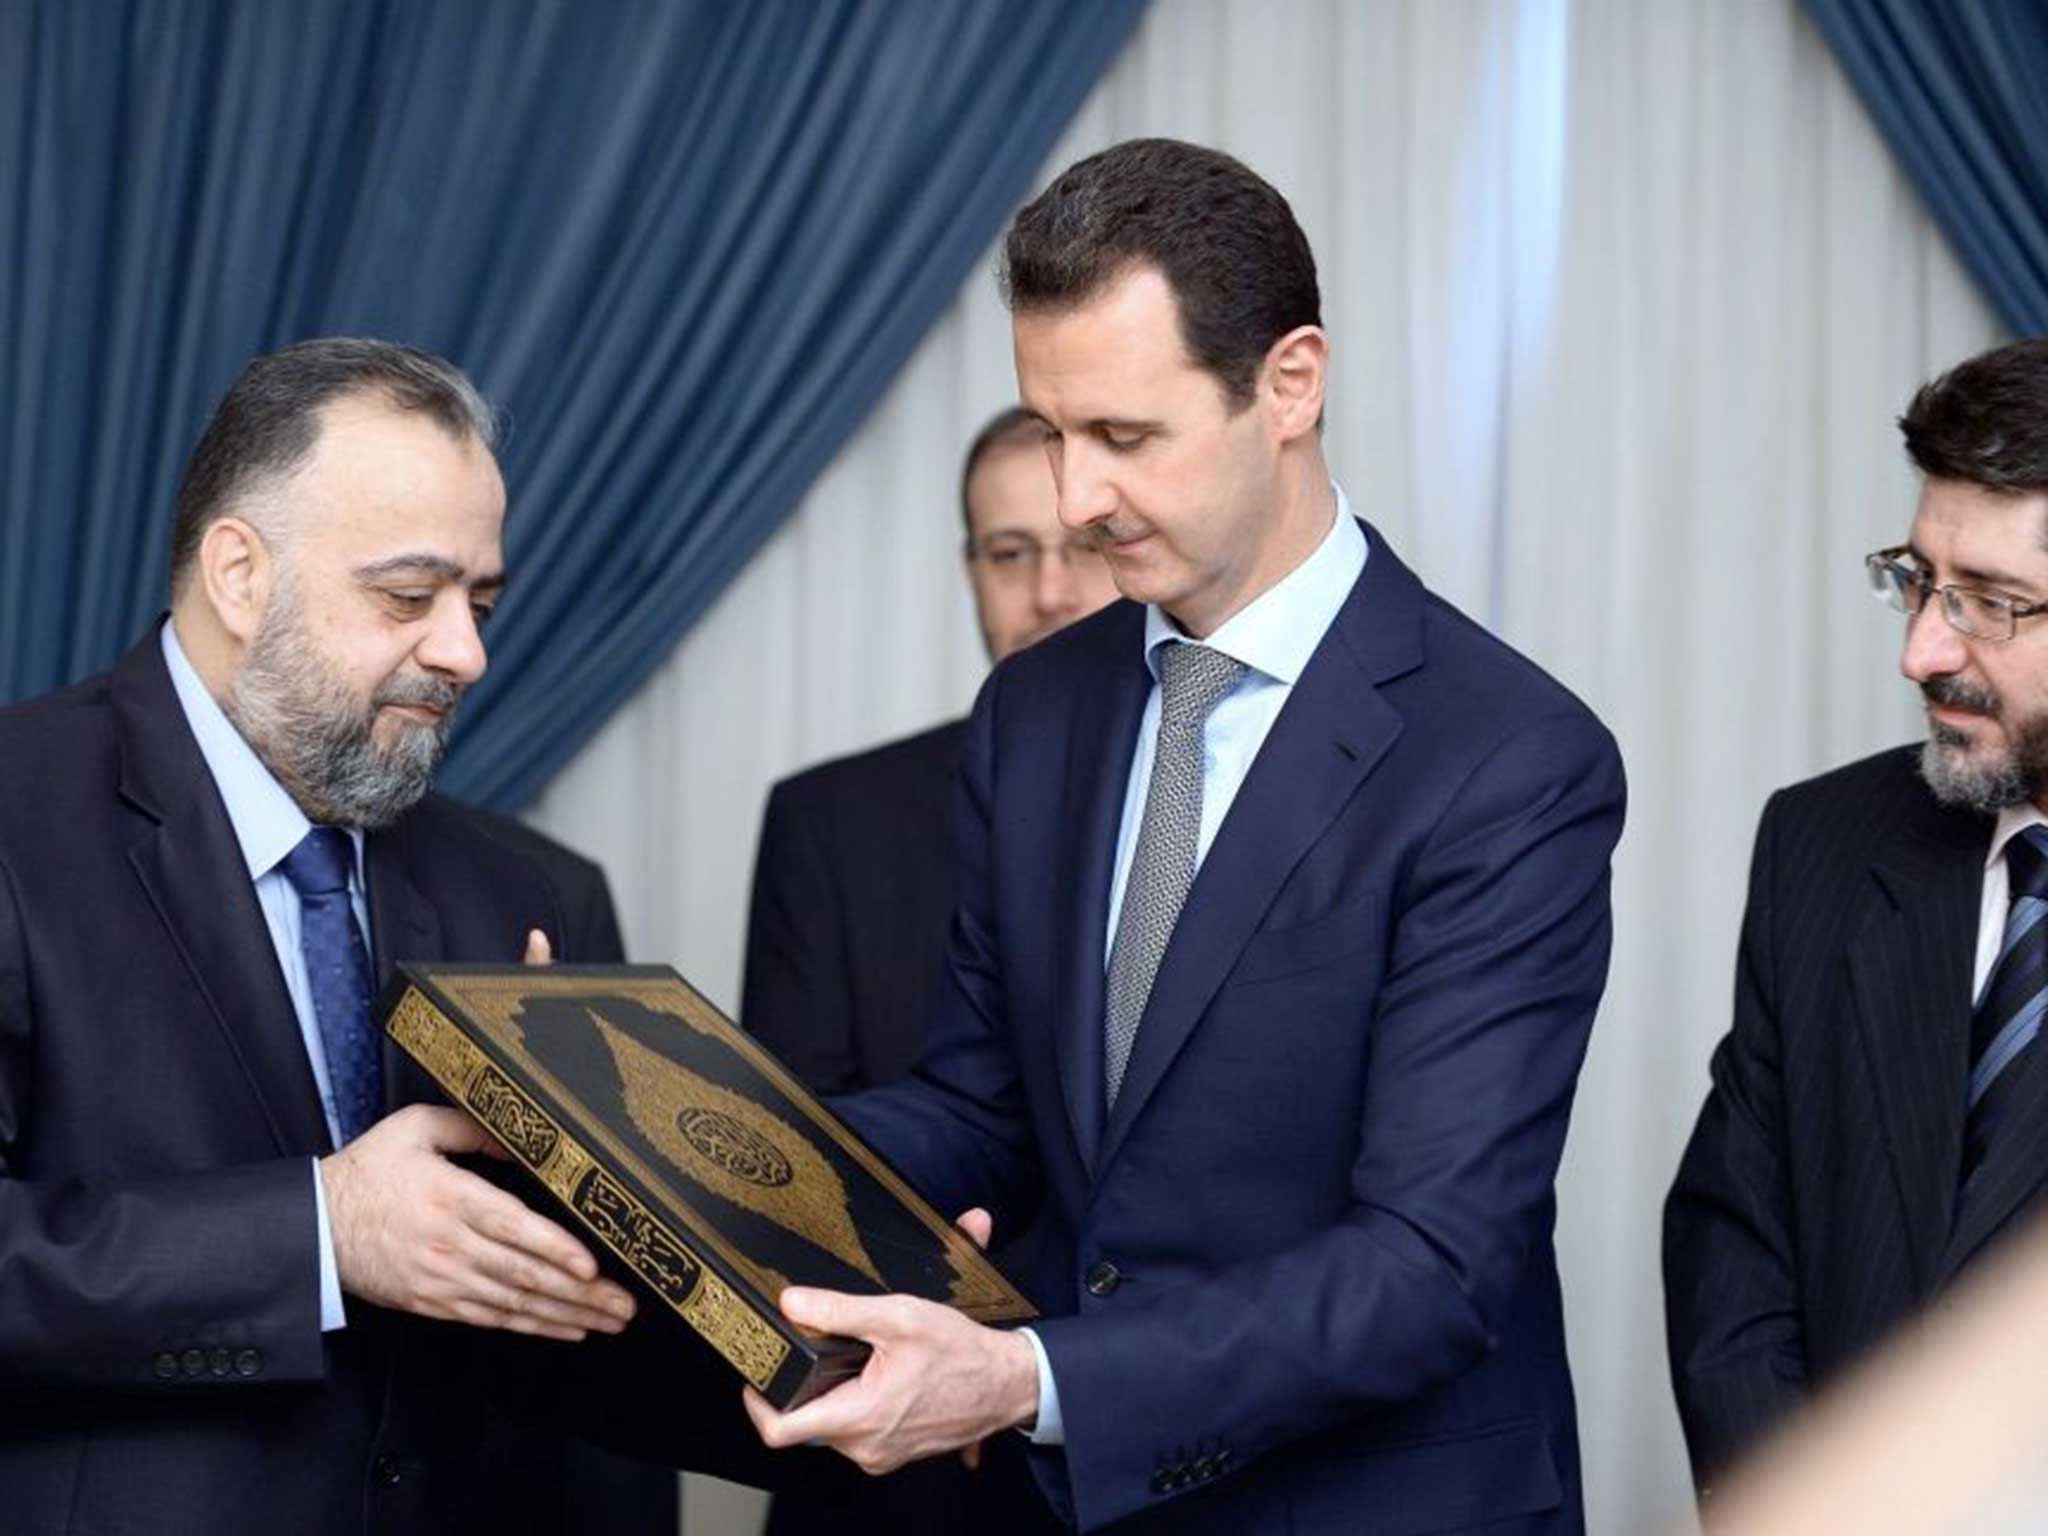 al-Assad is handed a new standard version of the Koran by Srian Minister Religious Endowments (Awqaf)